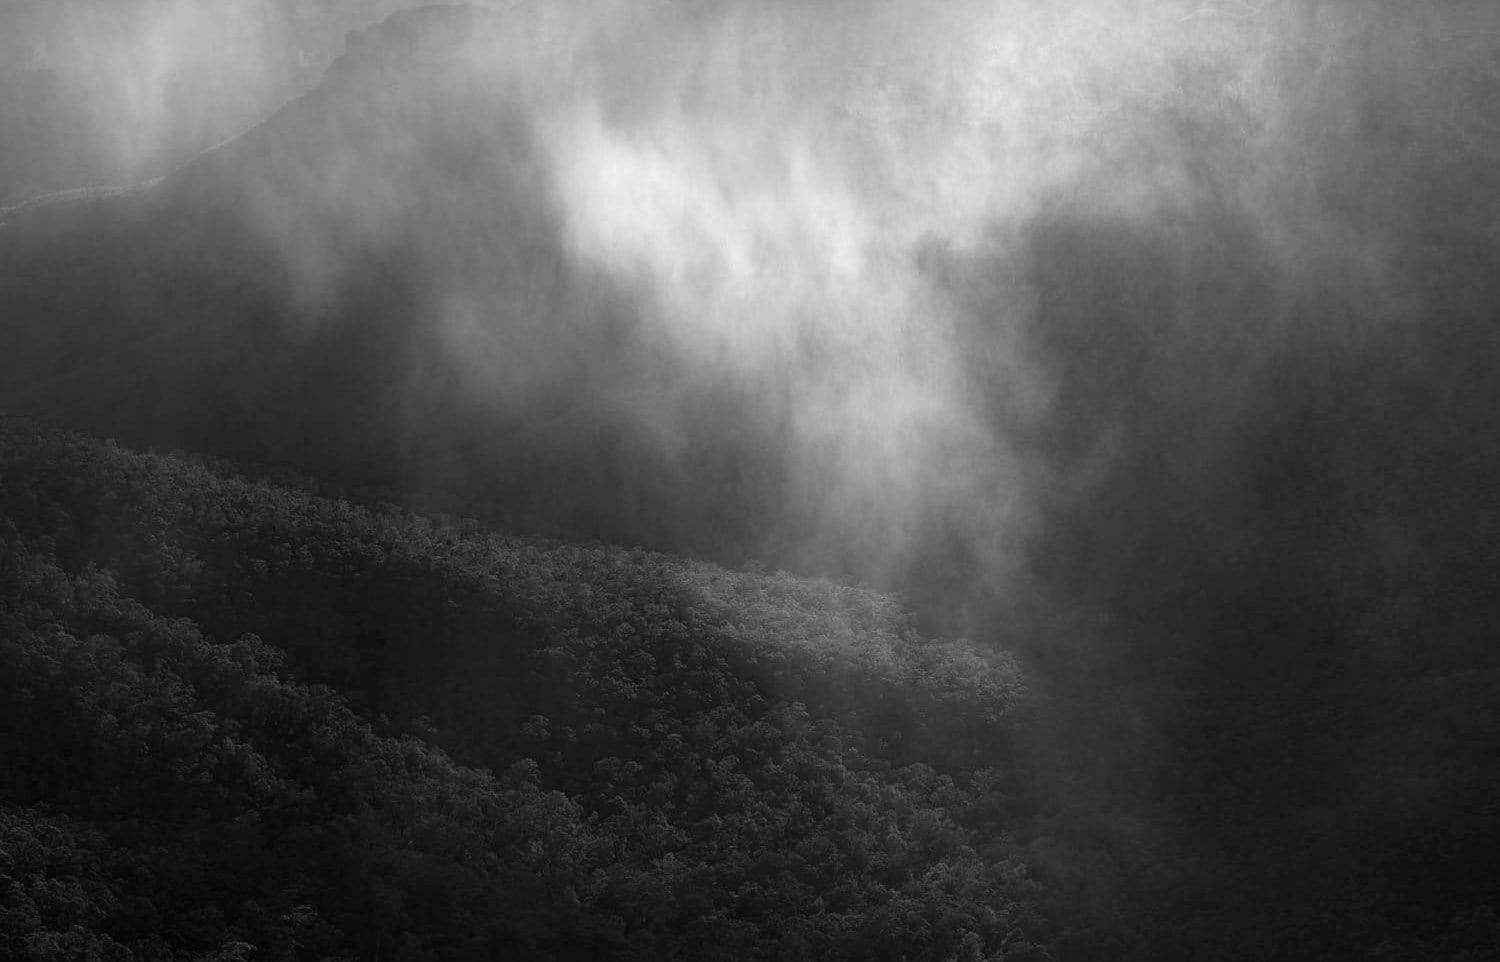 Smog and Fog with darkness, Mist Blue Mountains NSW